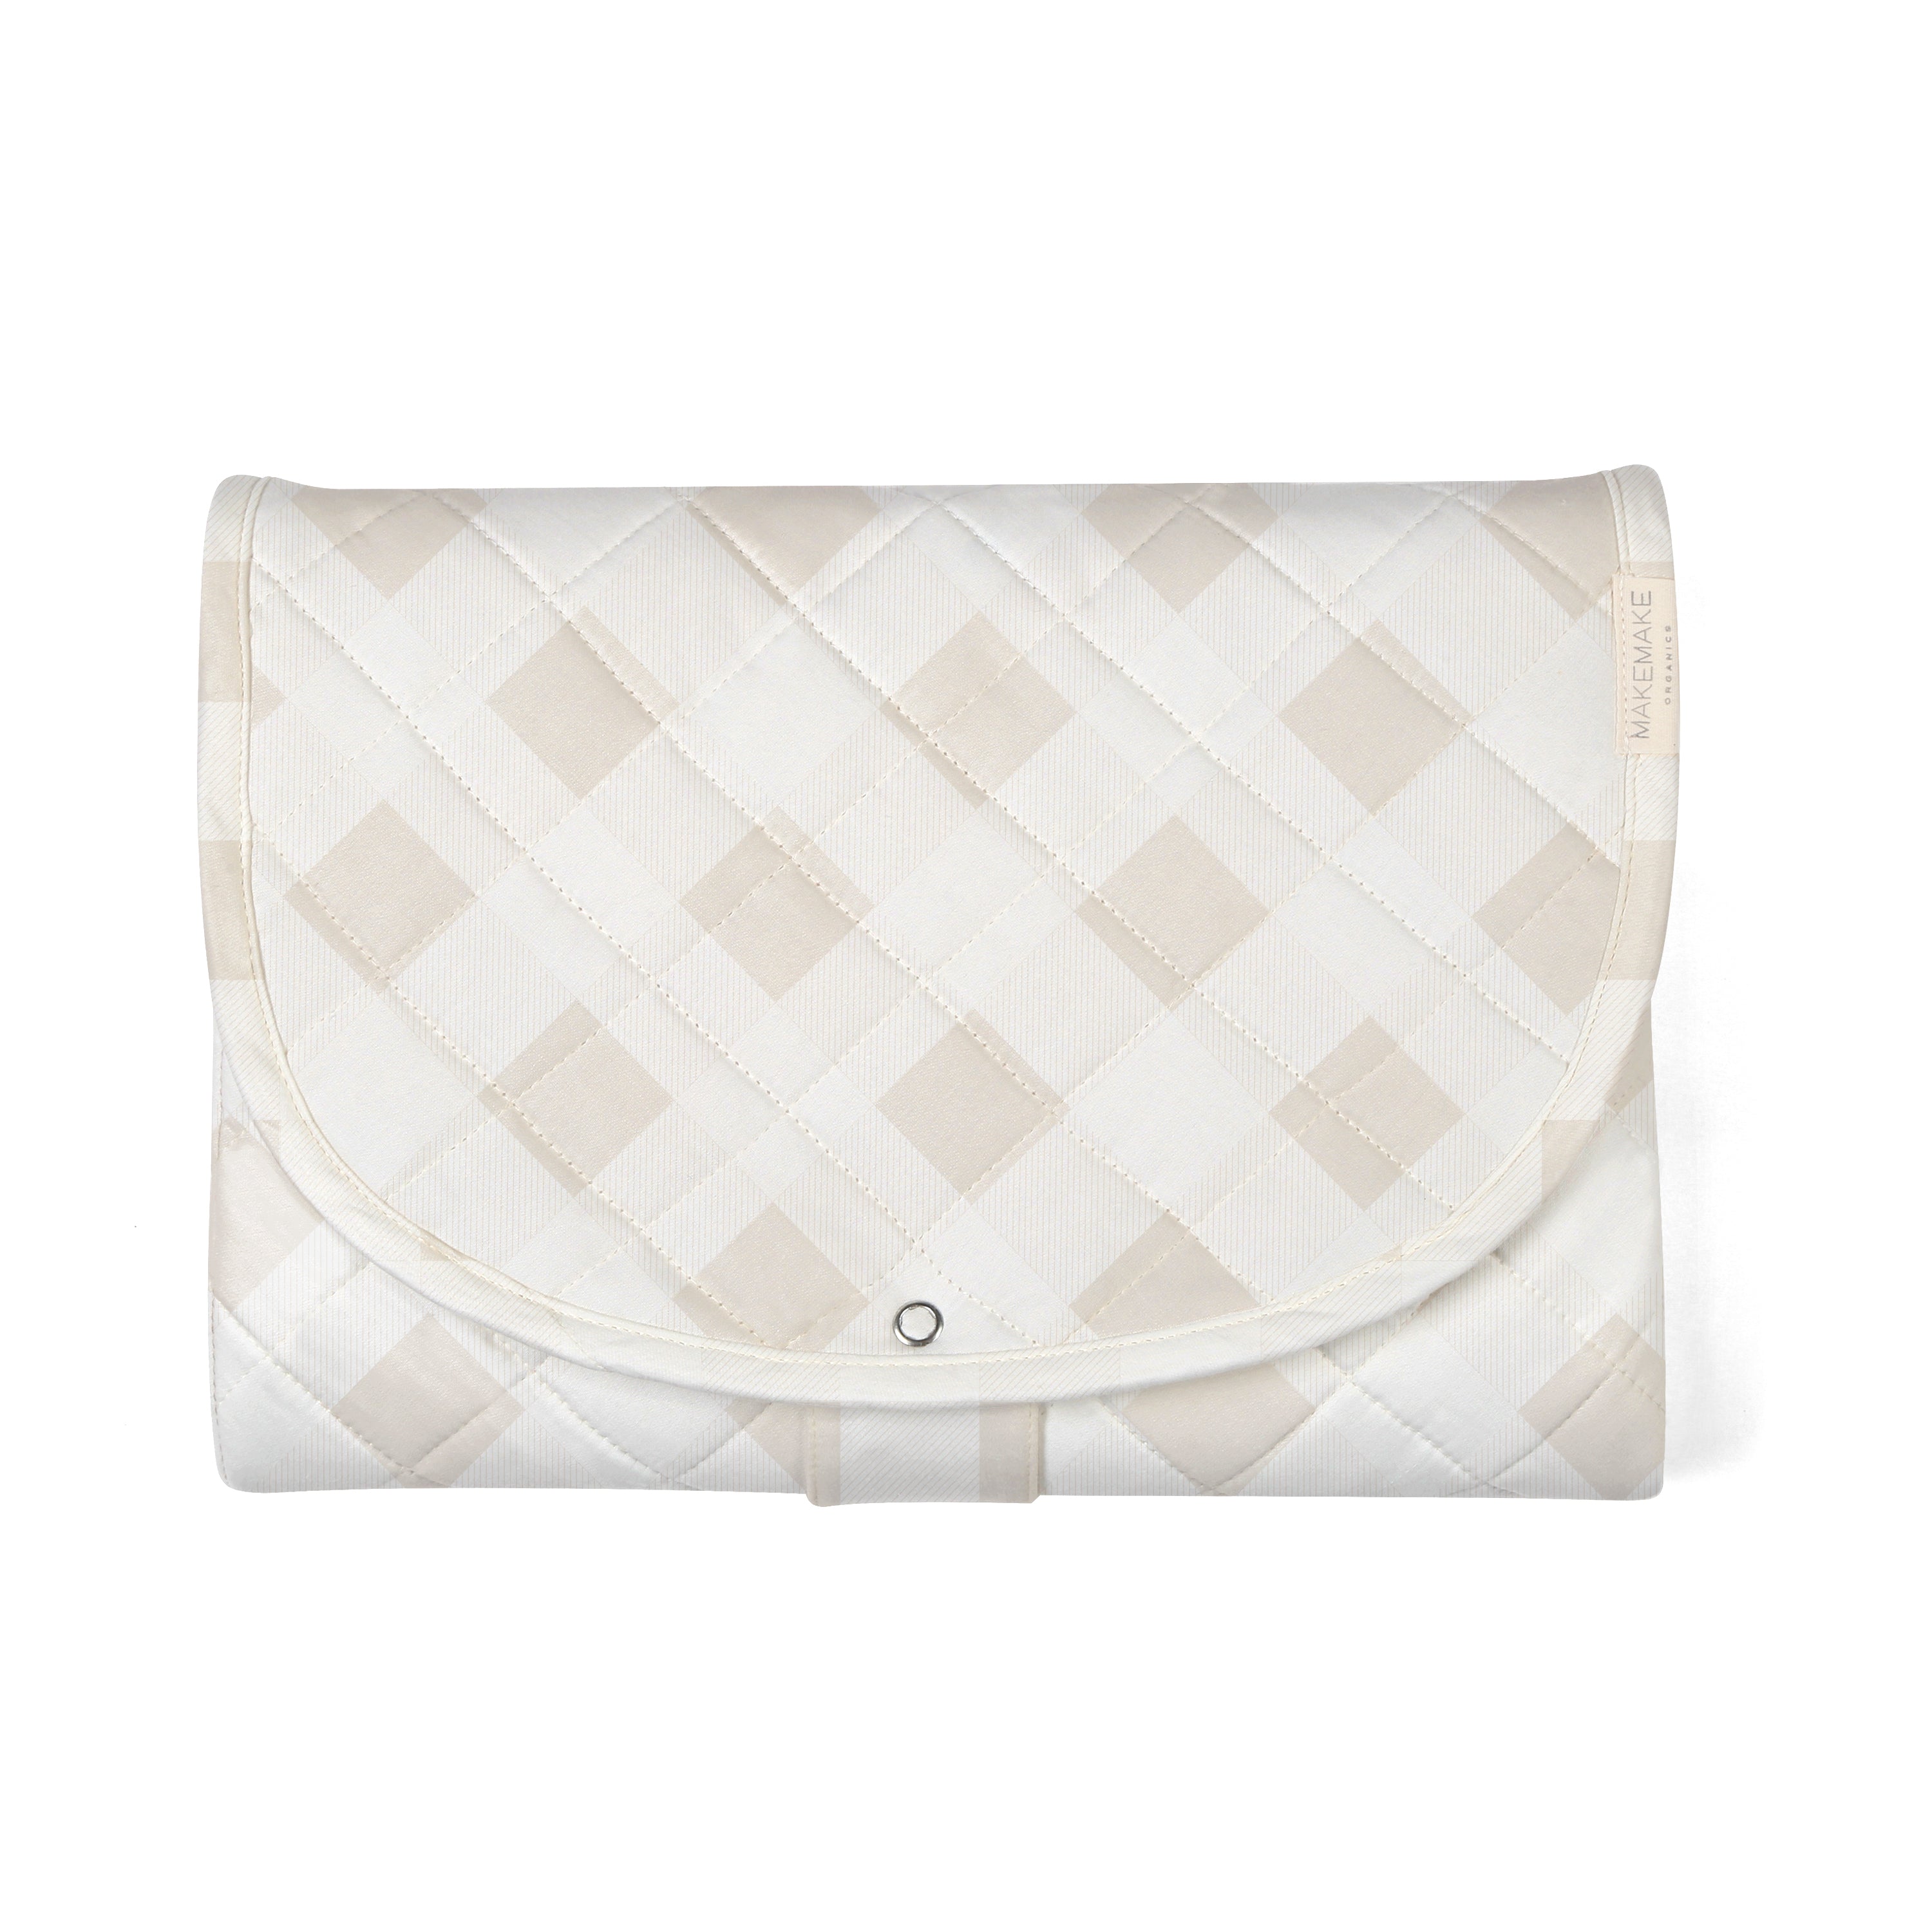 A light beige saddle pad featuring a quilted diamond pattern with a subtle Makemake Organics brand label and a black snap button closure, displayed on a white background.